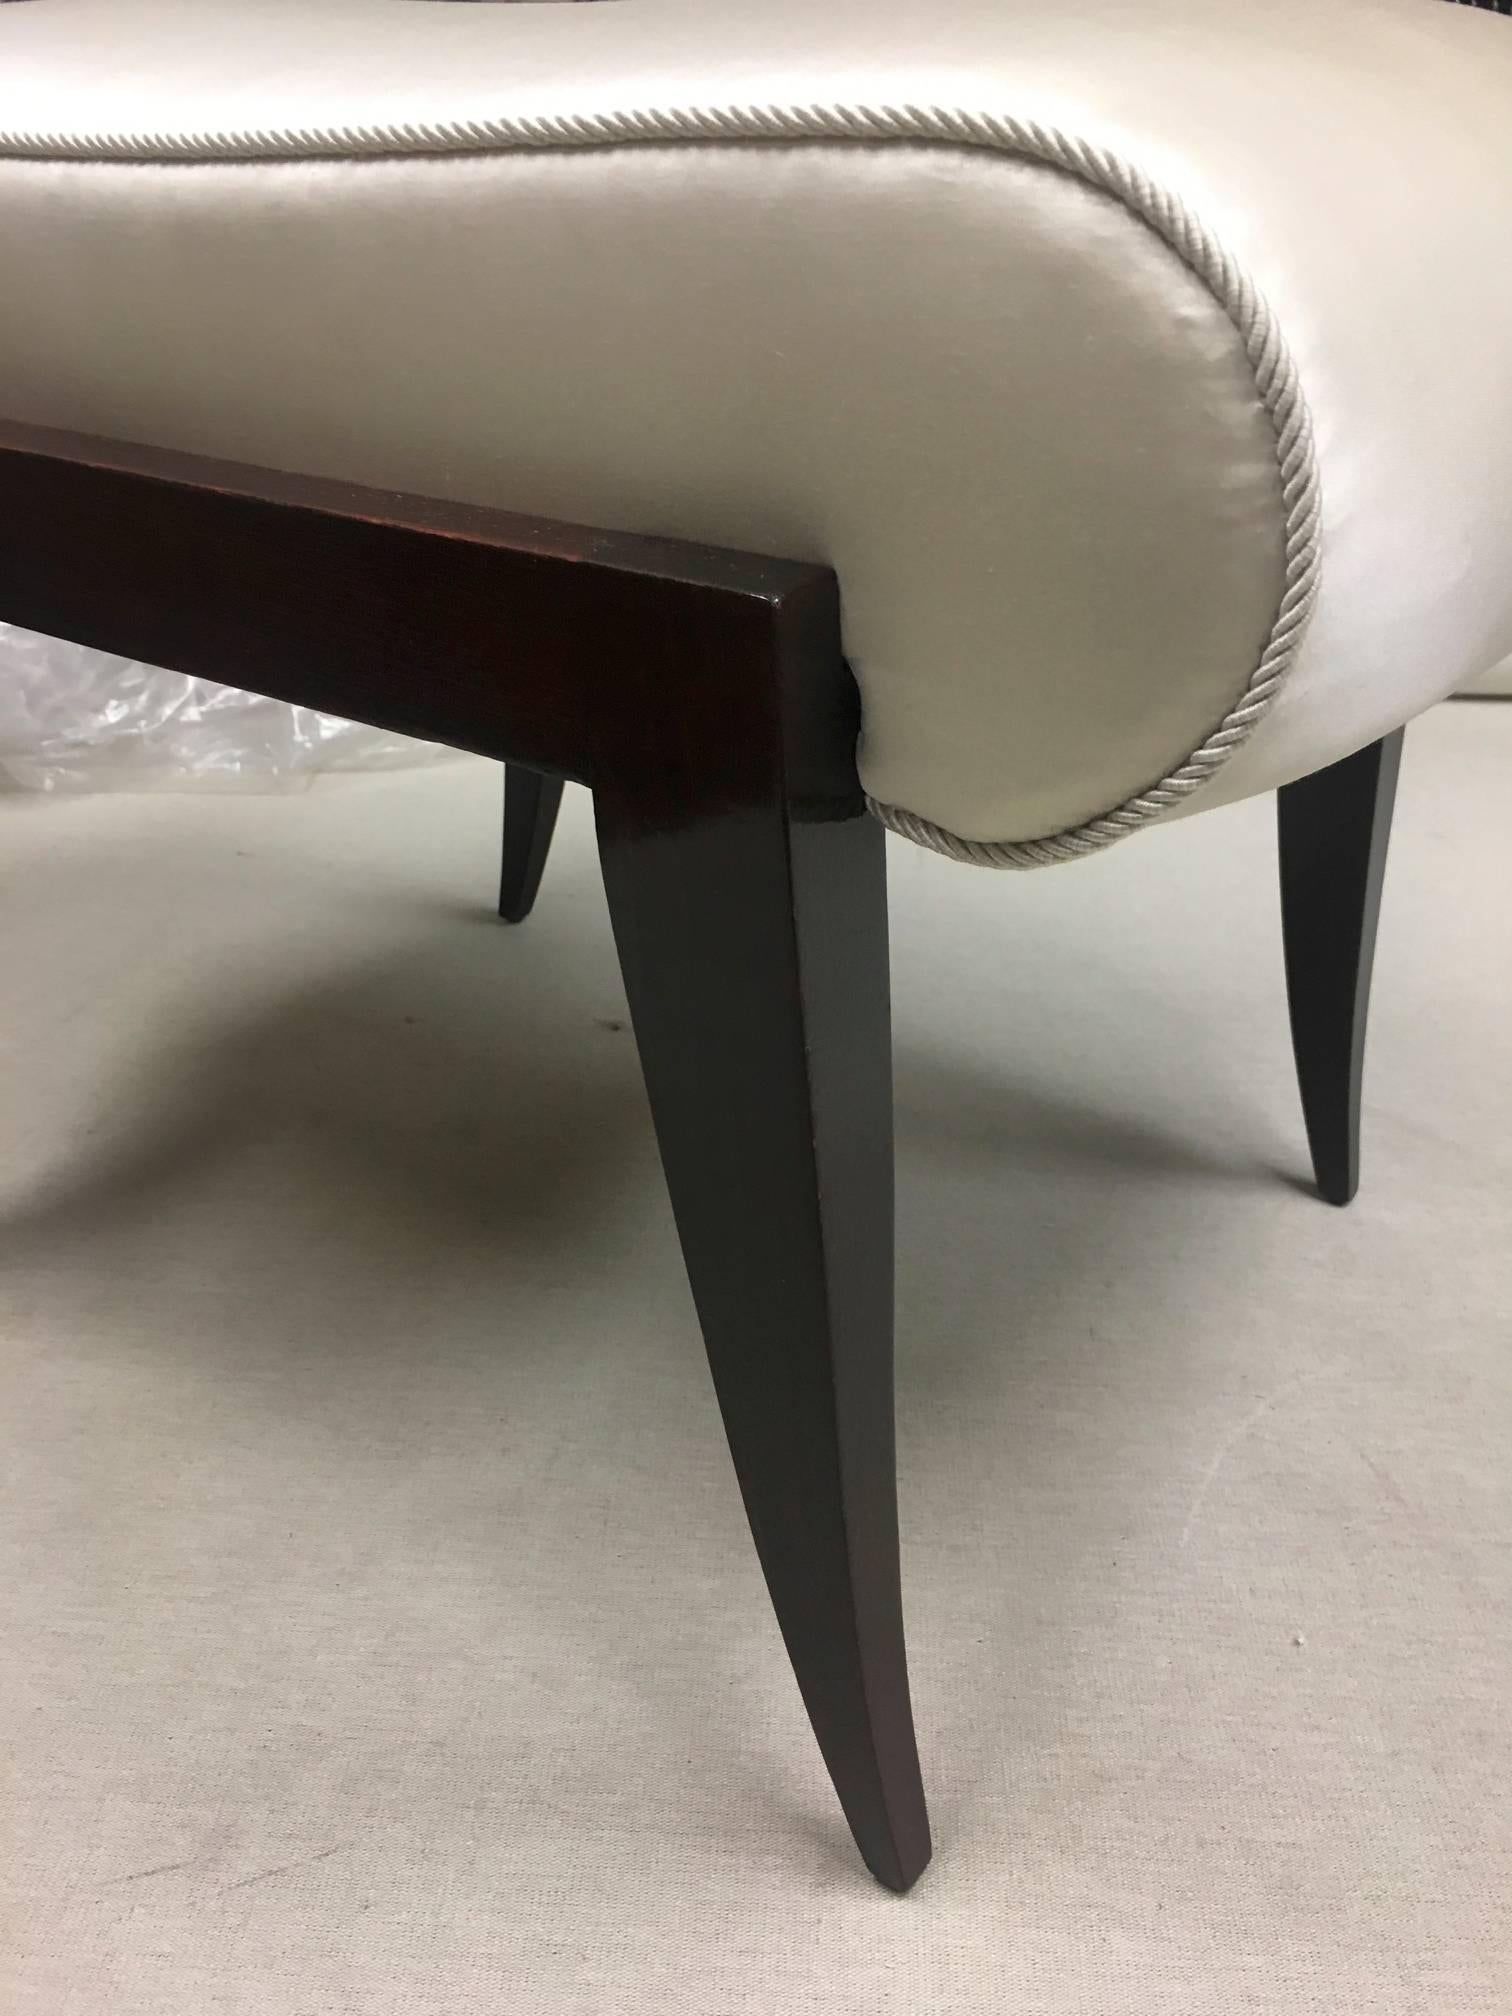 Maison Dominique Rarest Refined Art Deco Bench Newly Covered in Satin Silk In Excellent Condition For Sale In Paris, ile de france